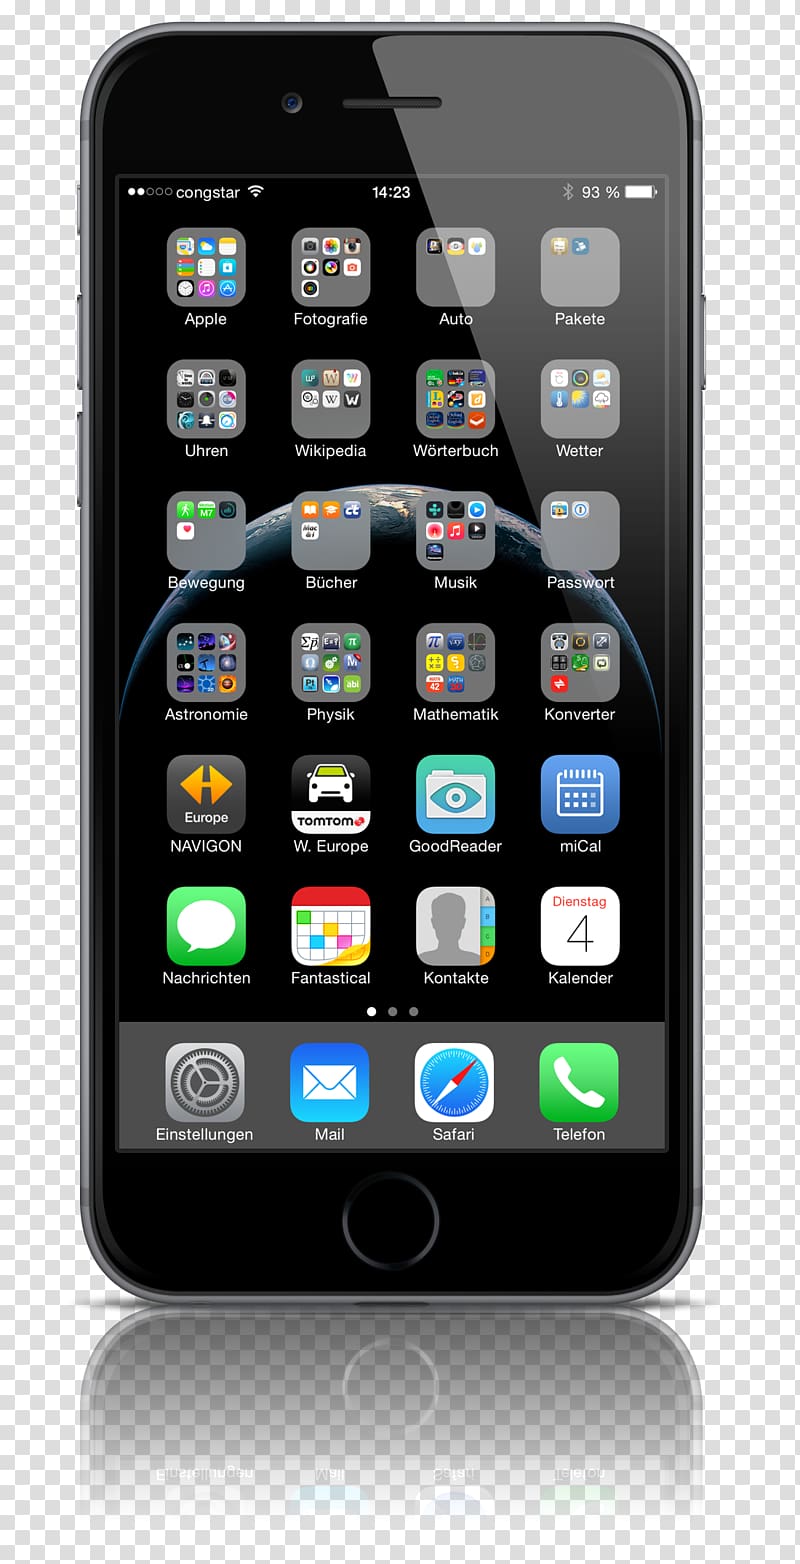 iPhone 3GS iPhone 4S iPhone 5, Iphone transparent background PNG clipart